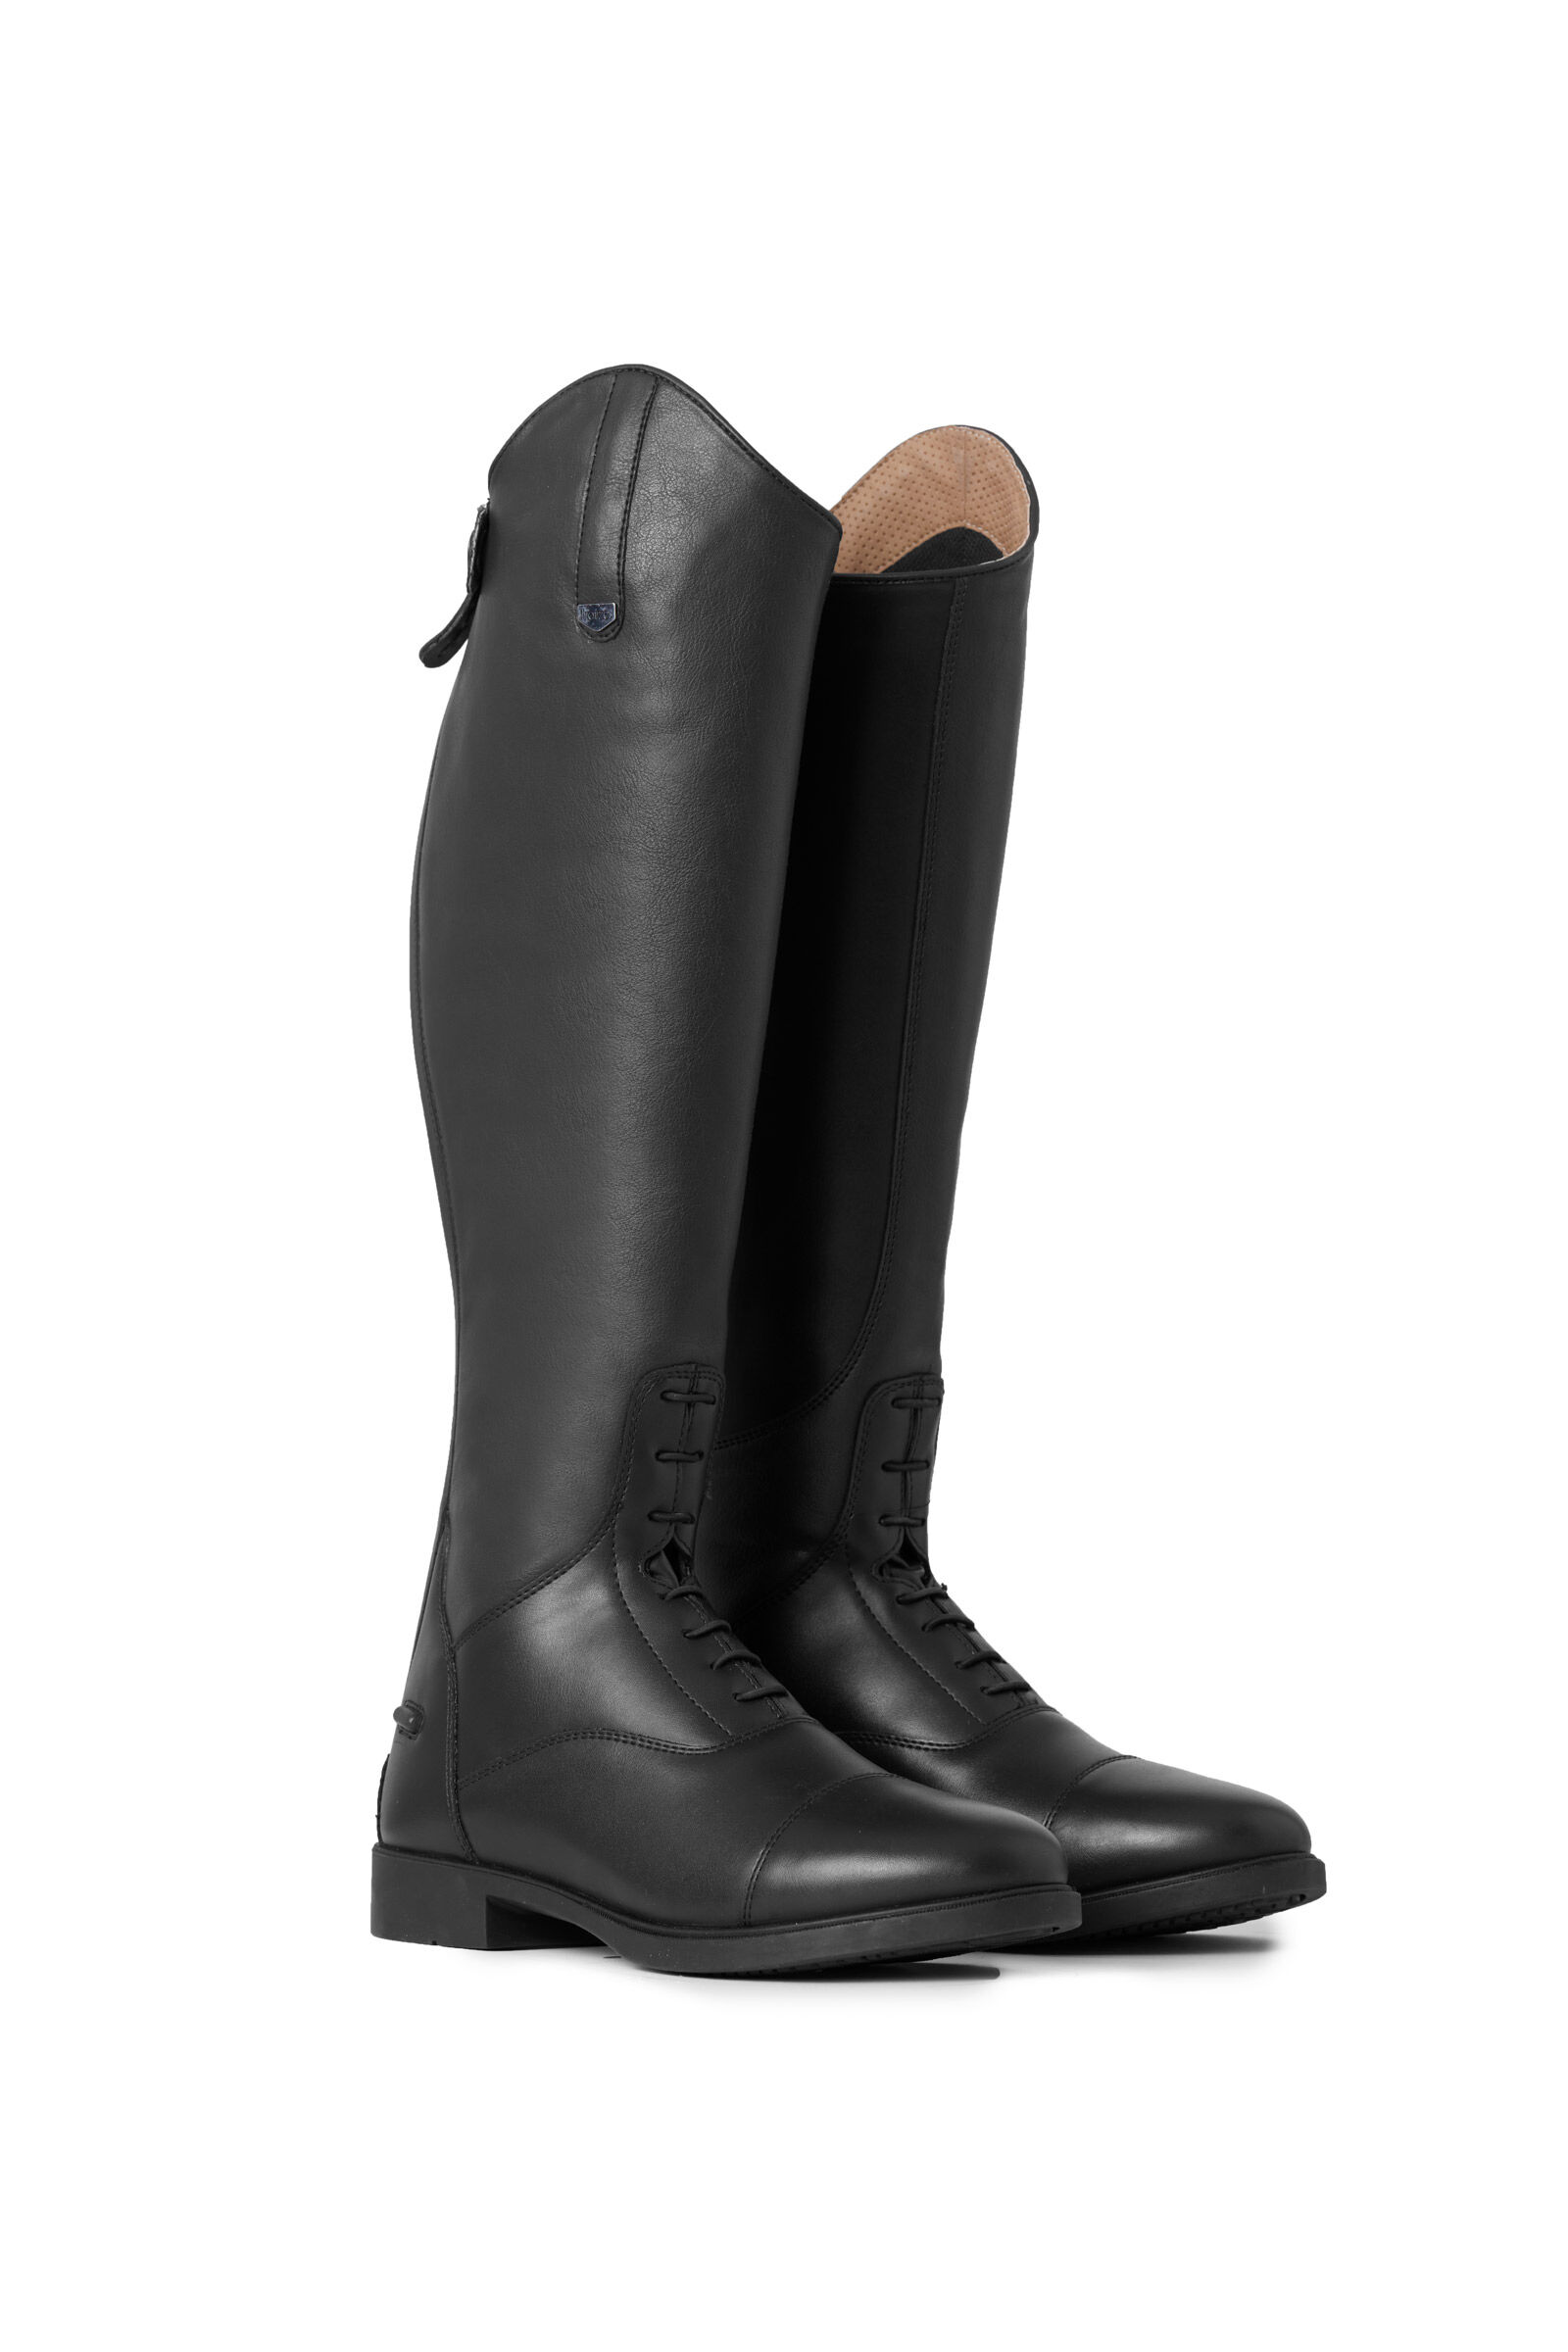 Ladies Synthetic Leather Field Long Riding Boots Black Regular UK 8 EURO 42 